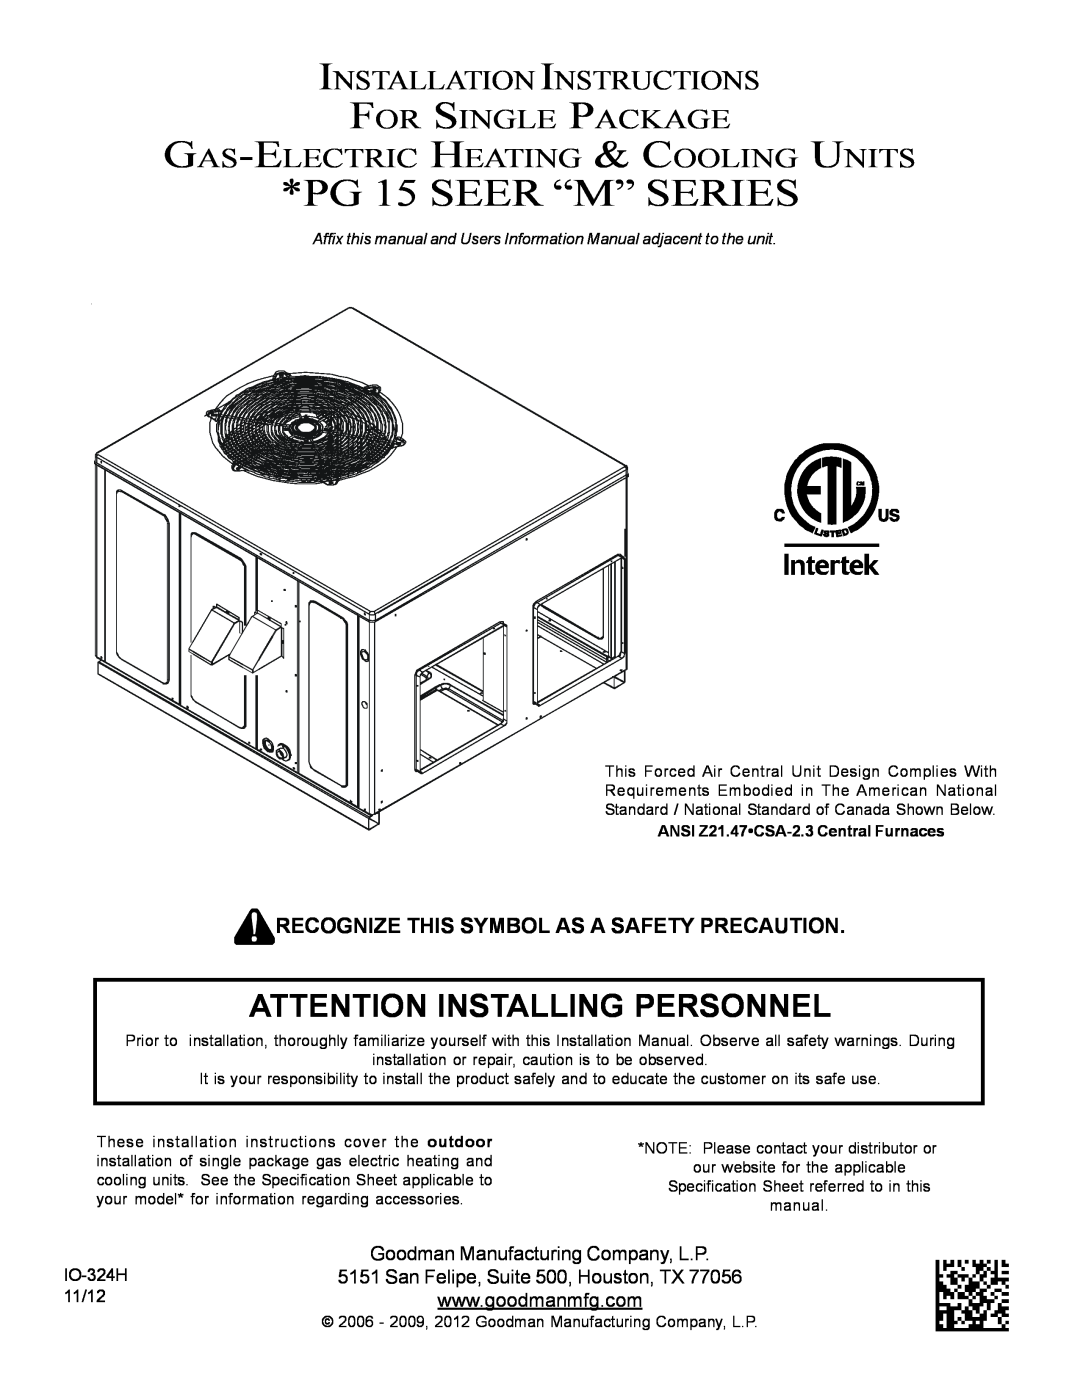 Goodman Mfg specifications Recognize This Symbol As A Safety Precaution, PG 15 SEER “M” SERIES, IO-324H, 11/12 